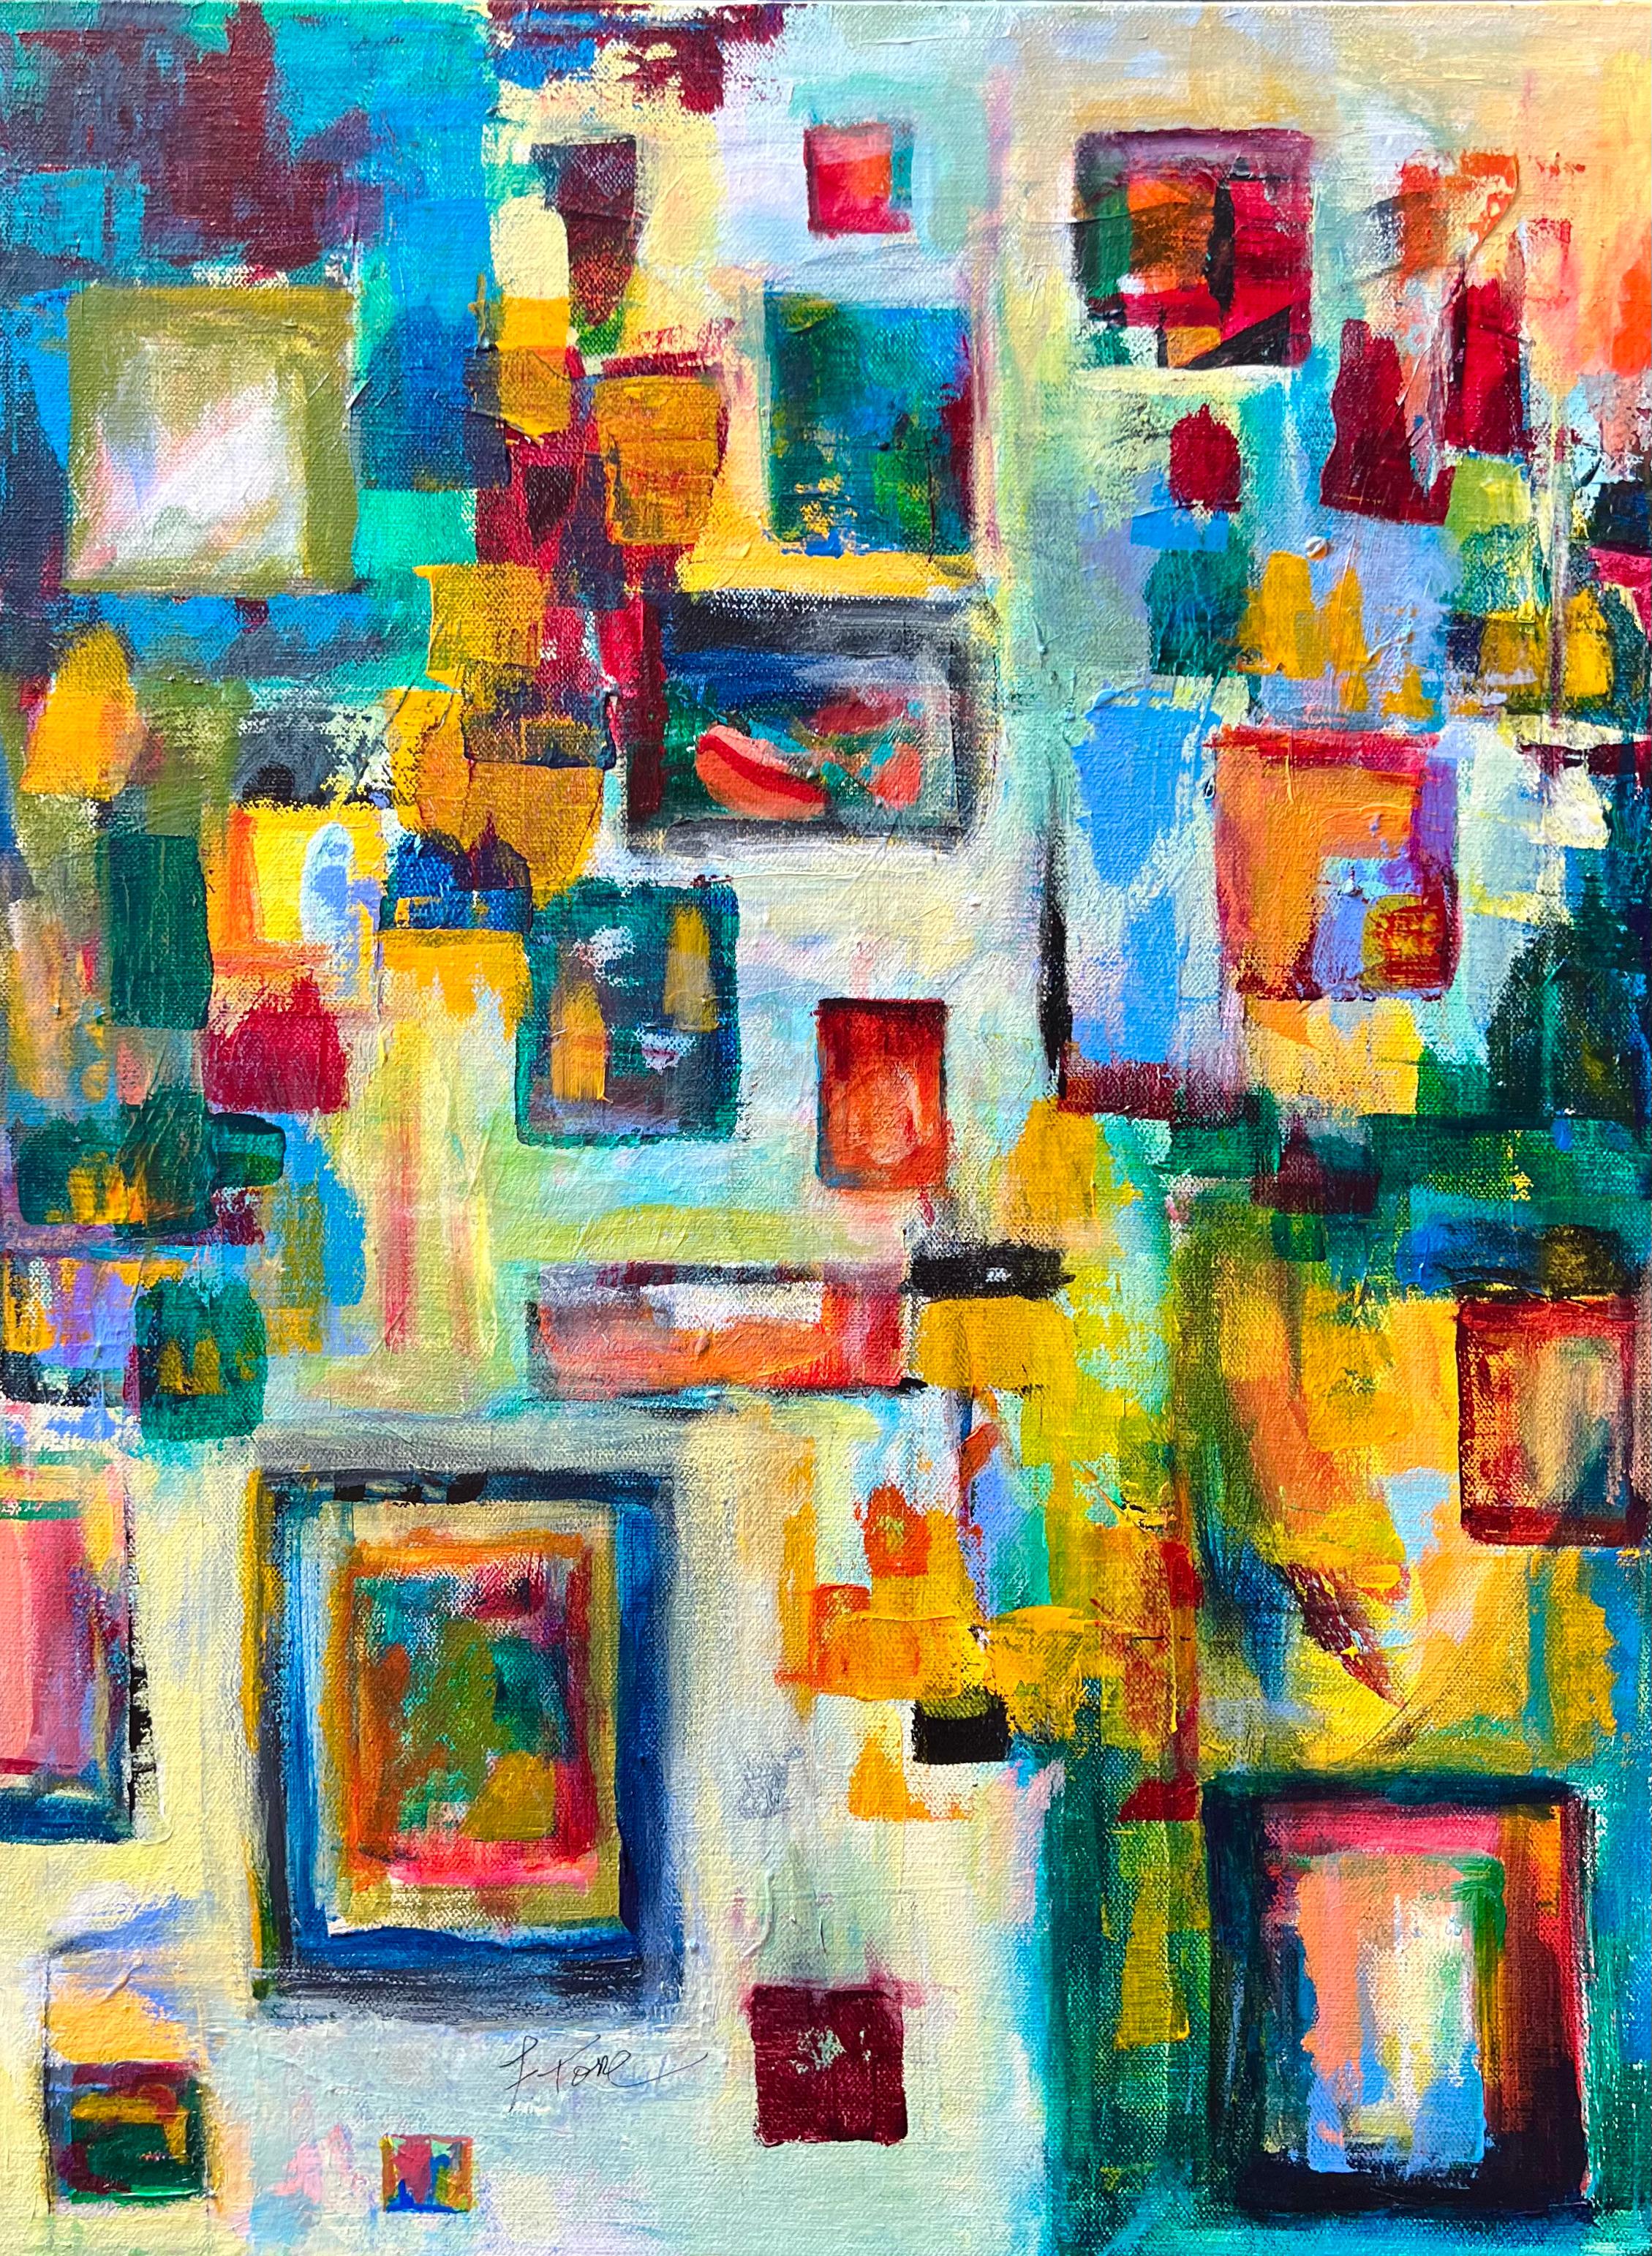 Fredda Tone Abstract Painting - Learn How to Float, bright color abstract painting, blues yellows reds